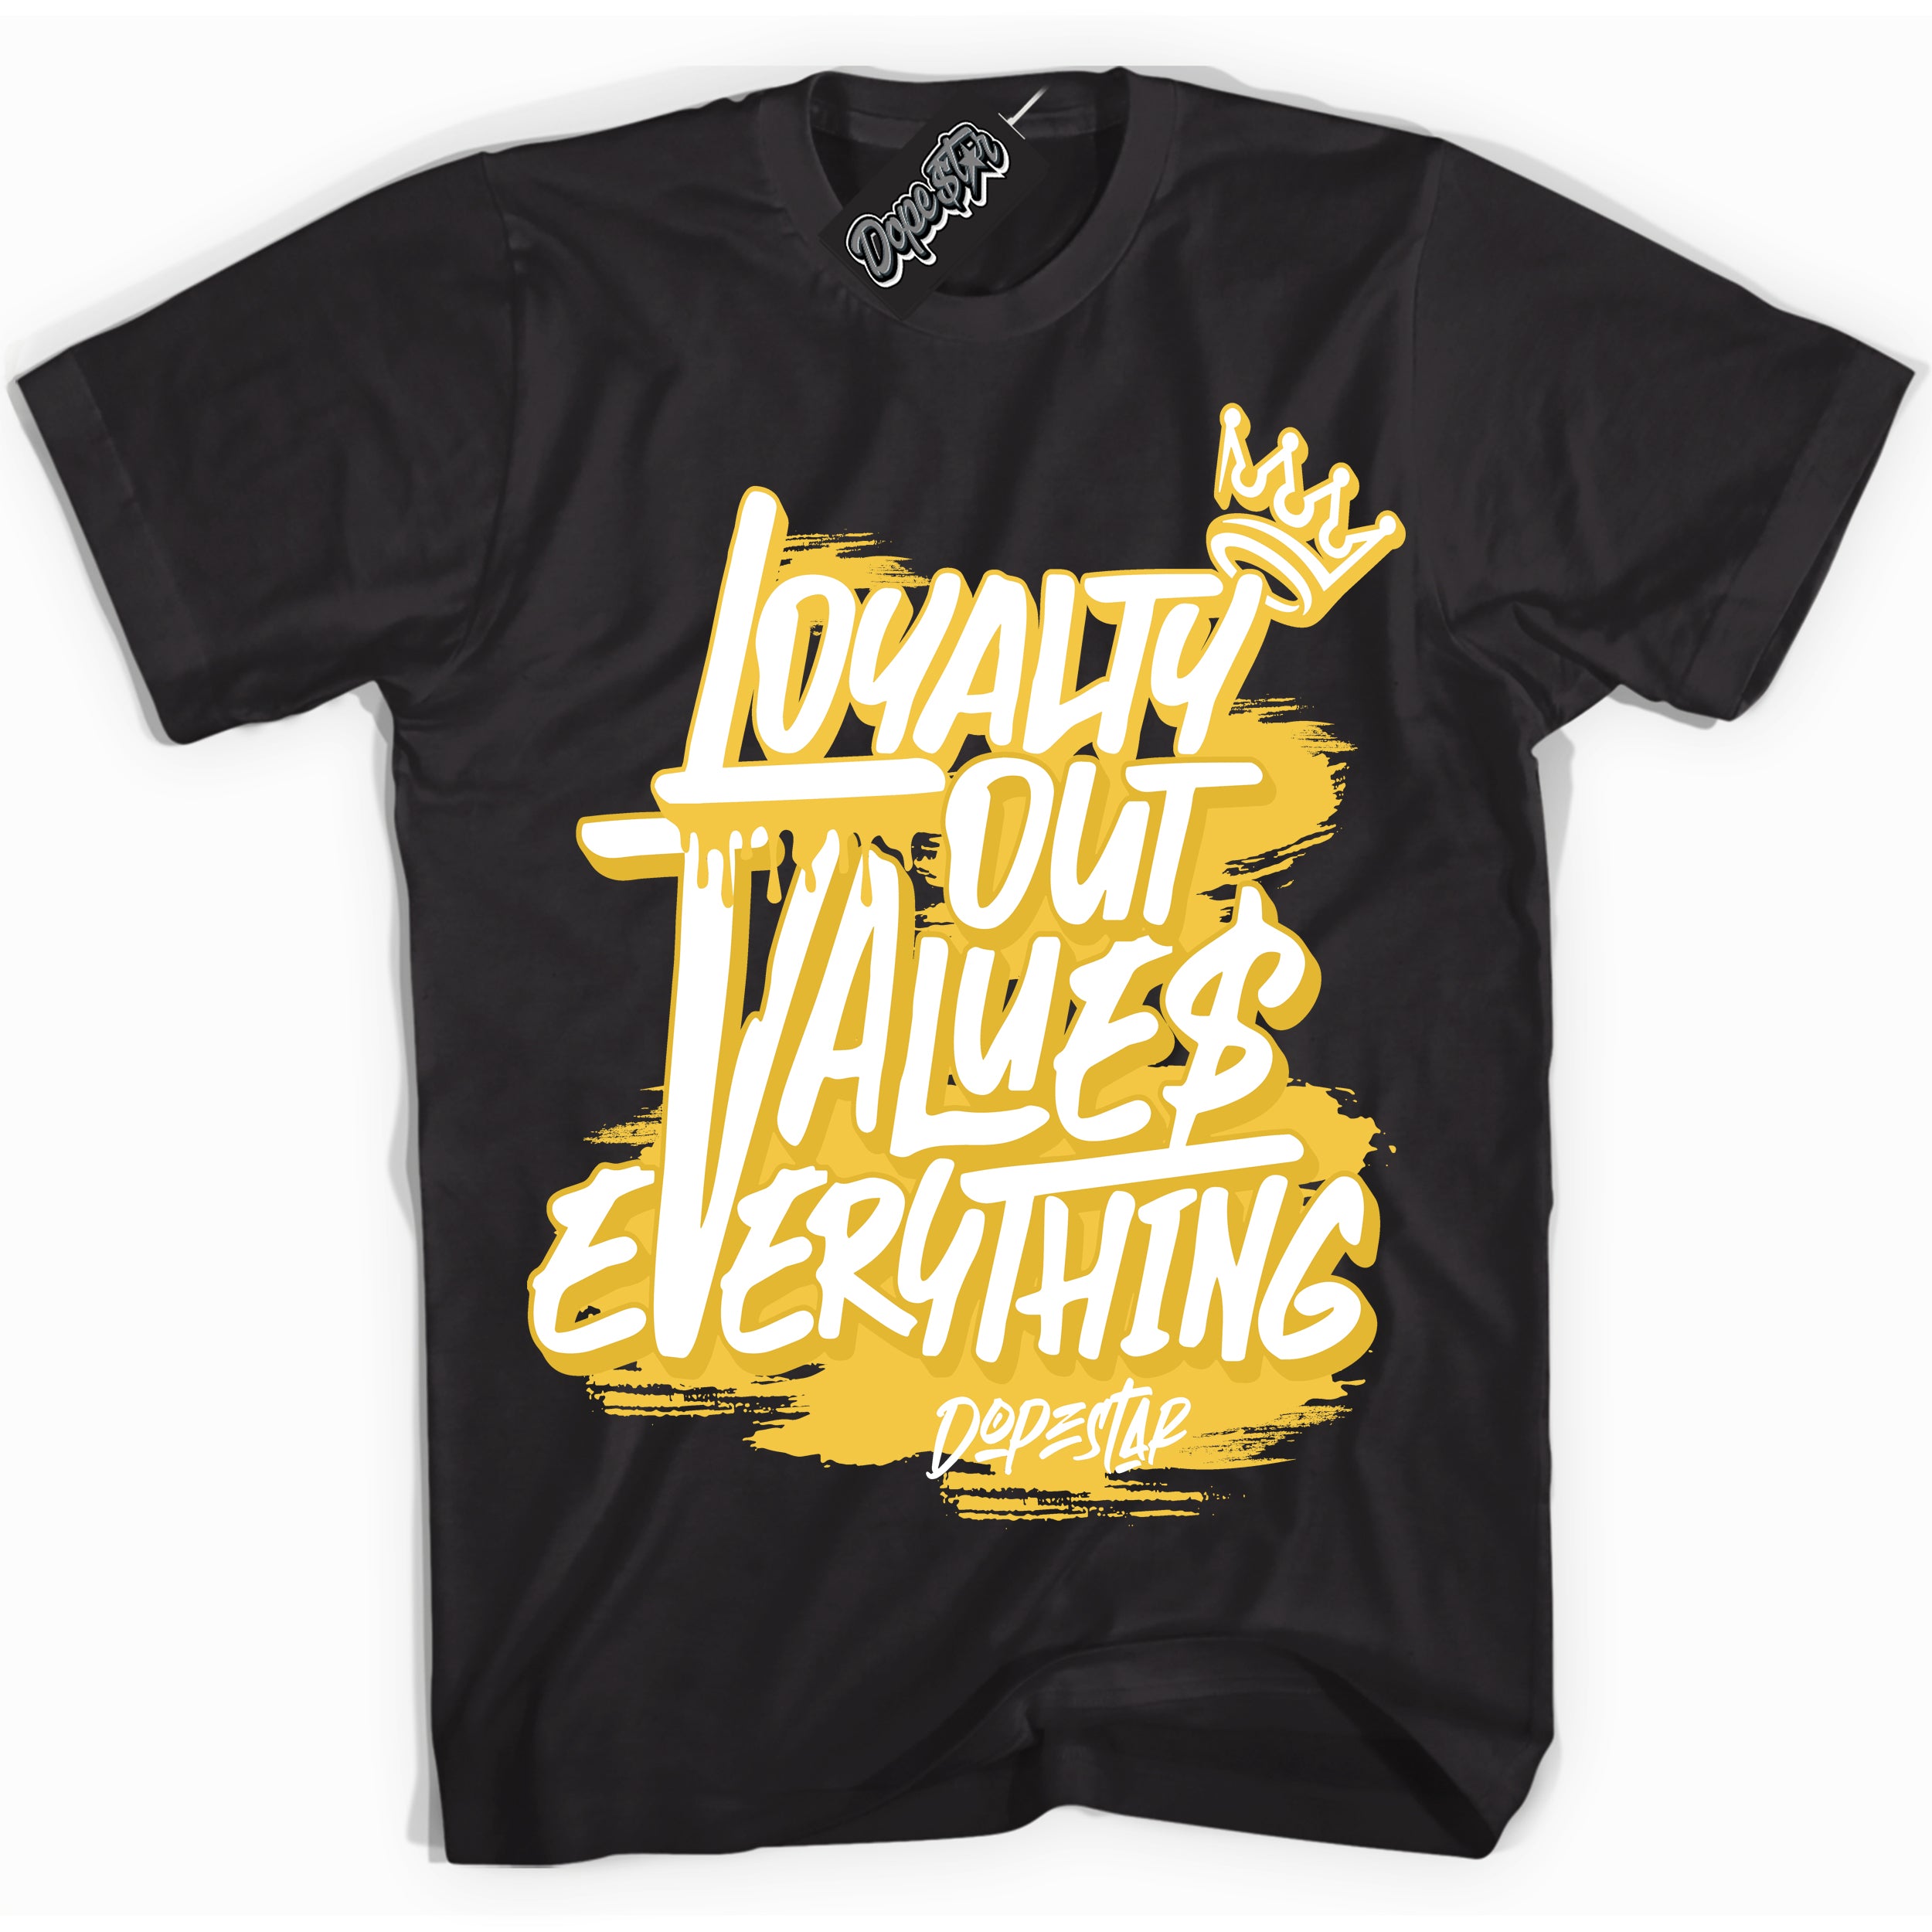 Cool Black Shirt with “ Loyalty Out Values Everything” design that perfectly matches Tour Yellow Snakeskin 11s Sneakers.